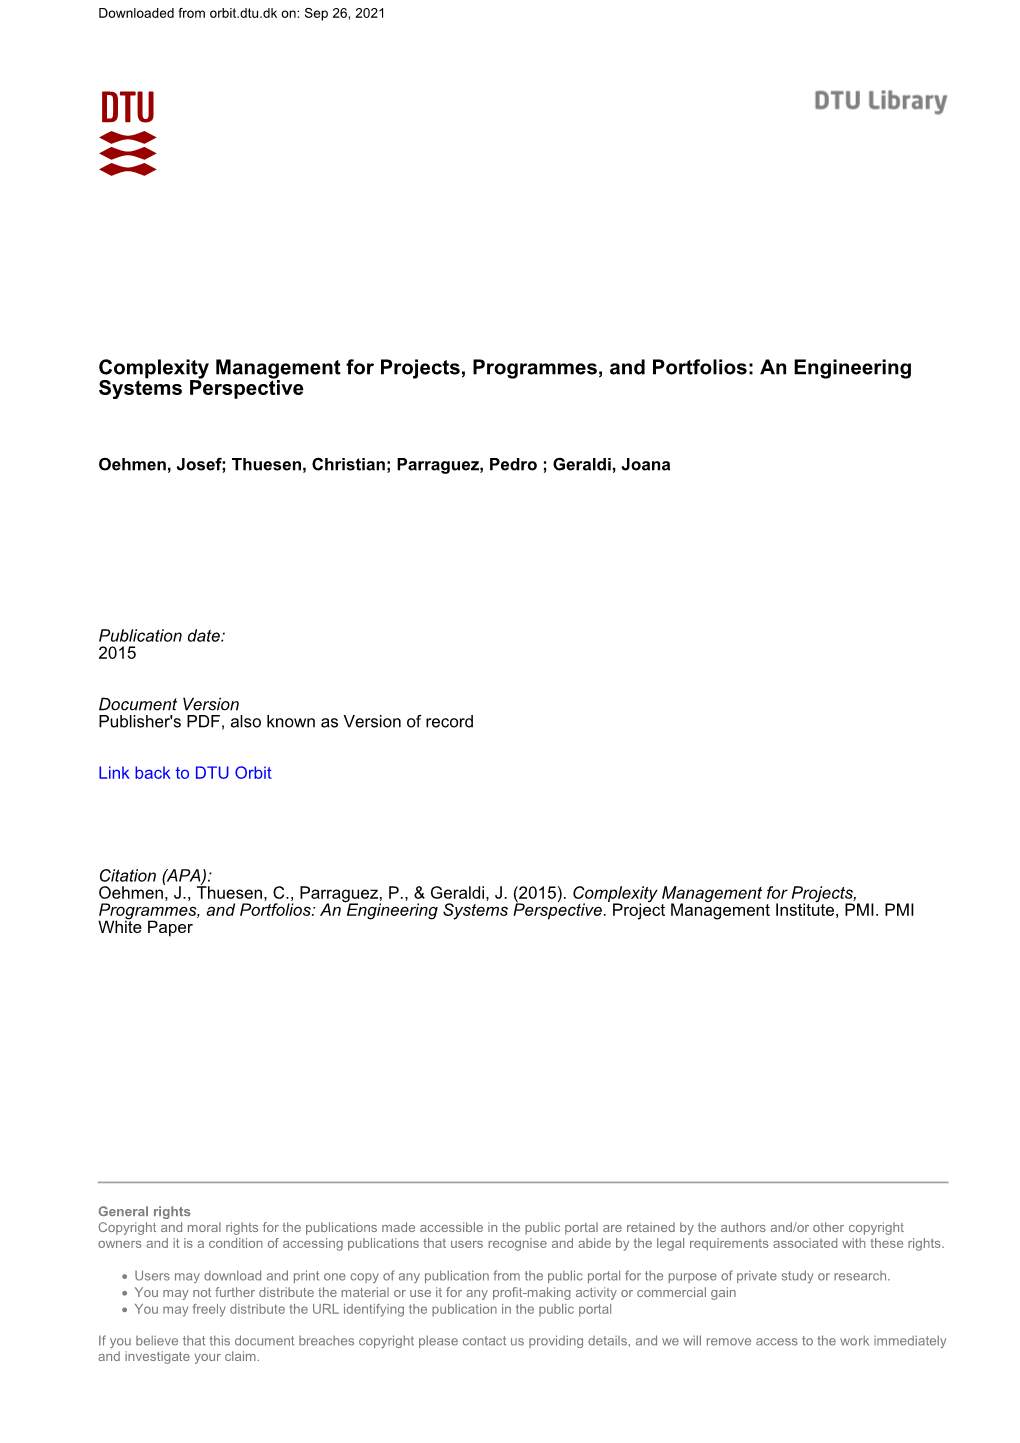 Complexity Management for Projects, Programmes, and Portfolios: an Engineering Systems Perspective